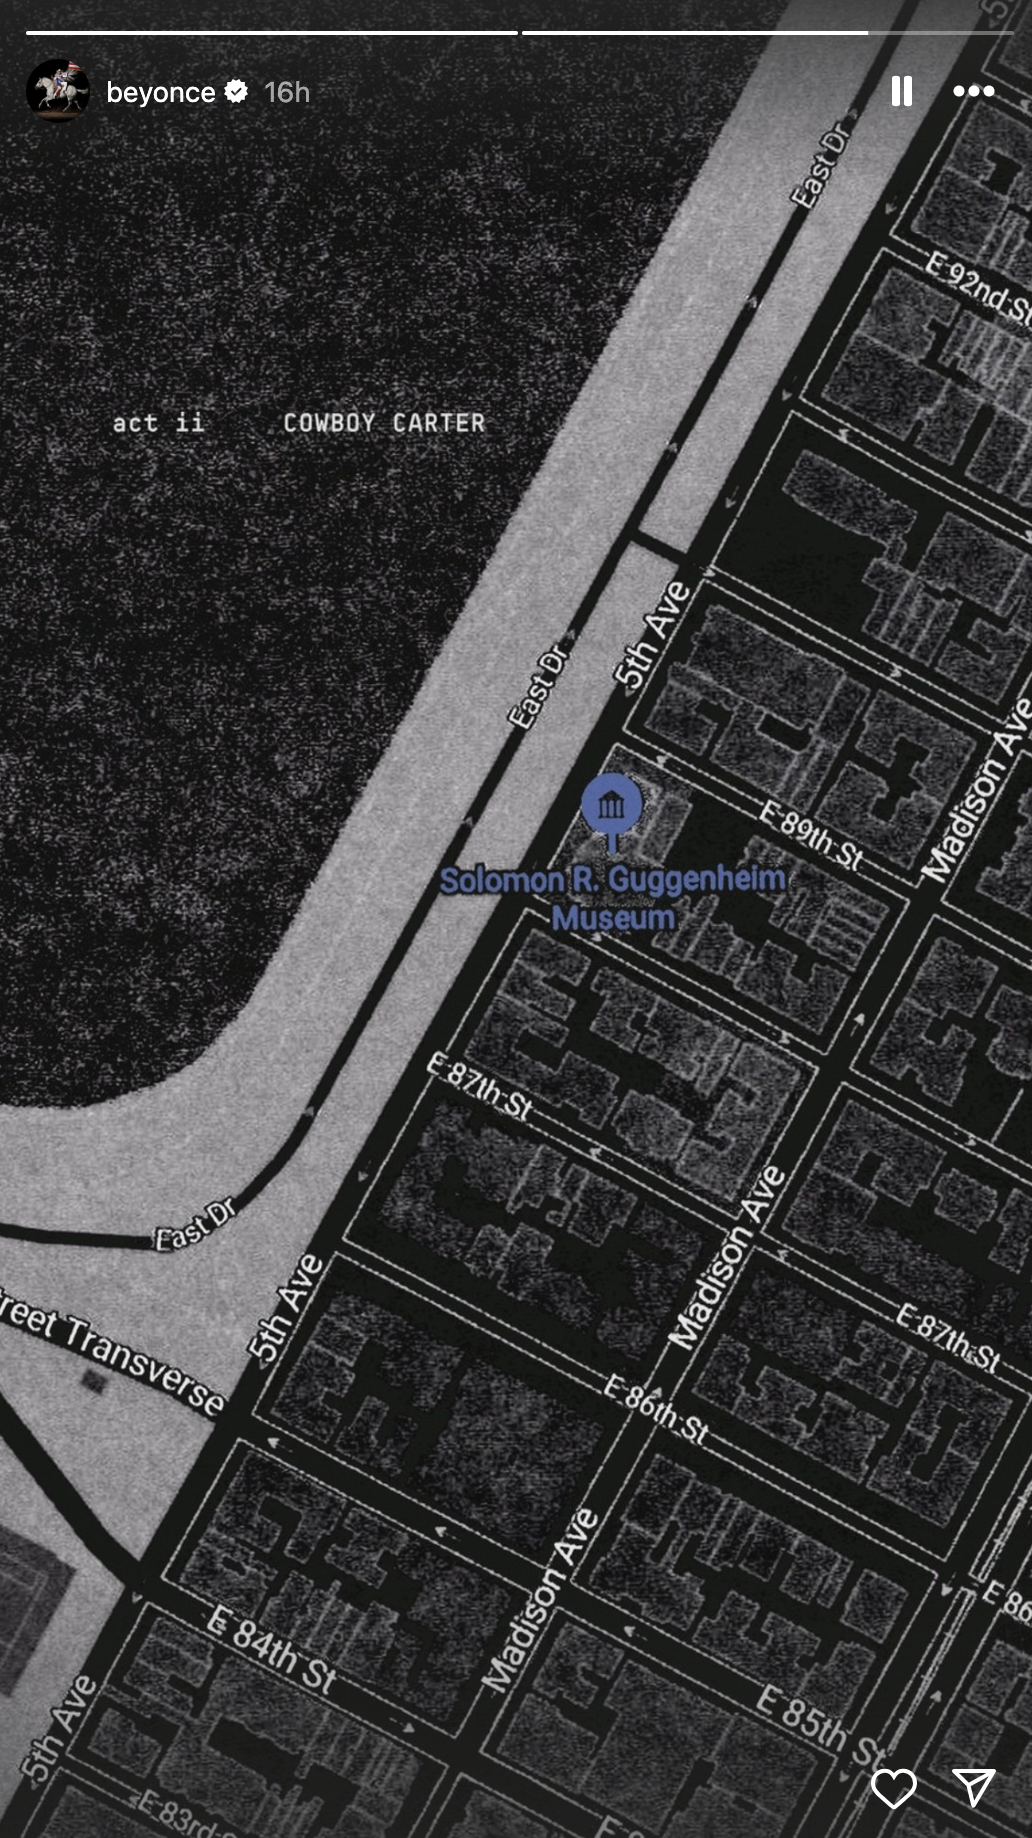 This image shows a screen capture of a map featuring the Solomon R. Guggenheim Museum location